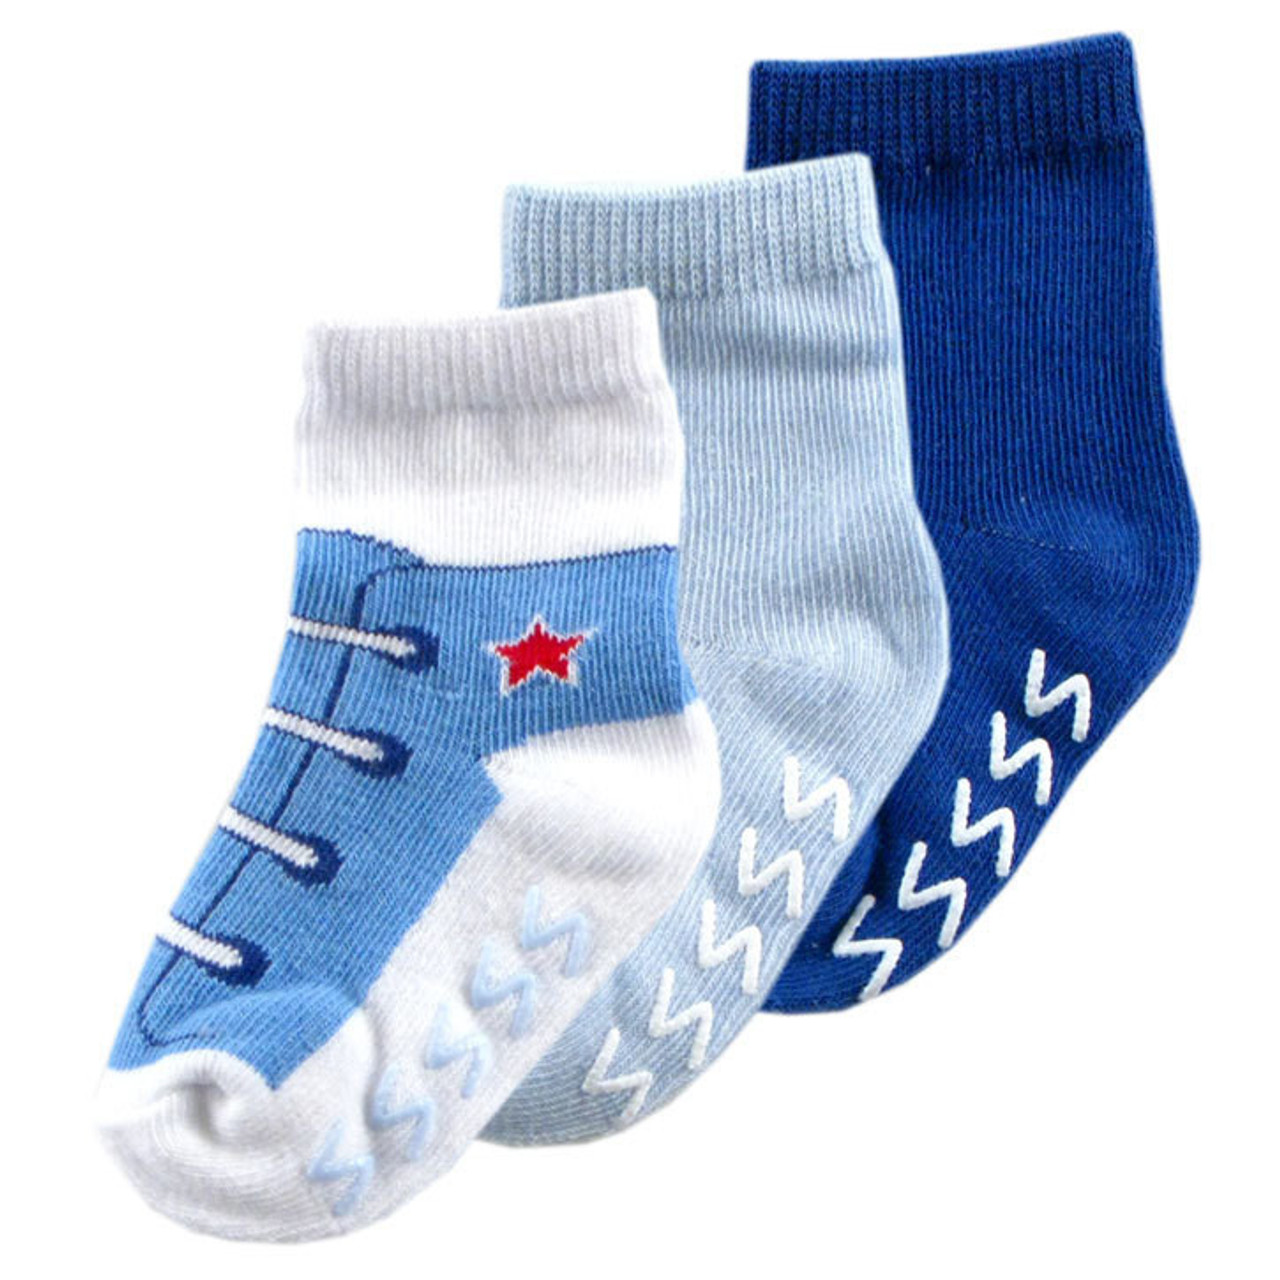 Luvable Friends Shoe Socks, 3-Pack, Blue Star | Baby and Toddler ...